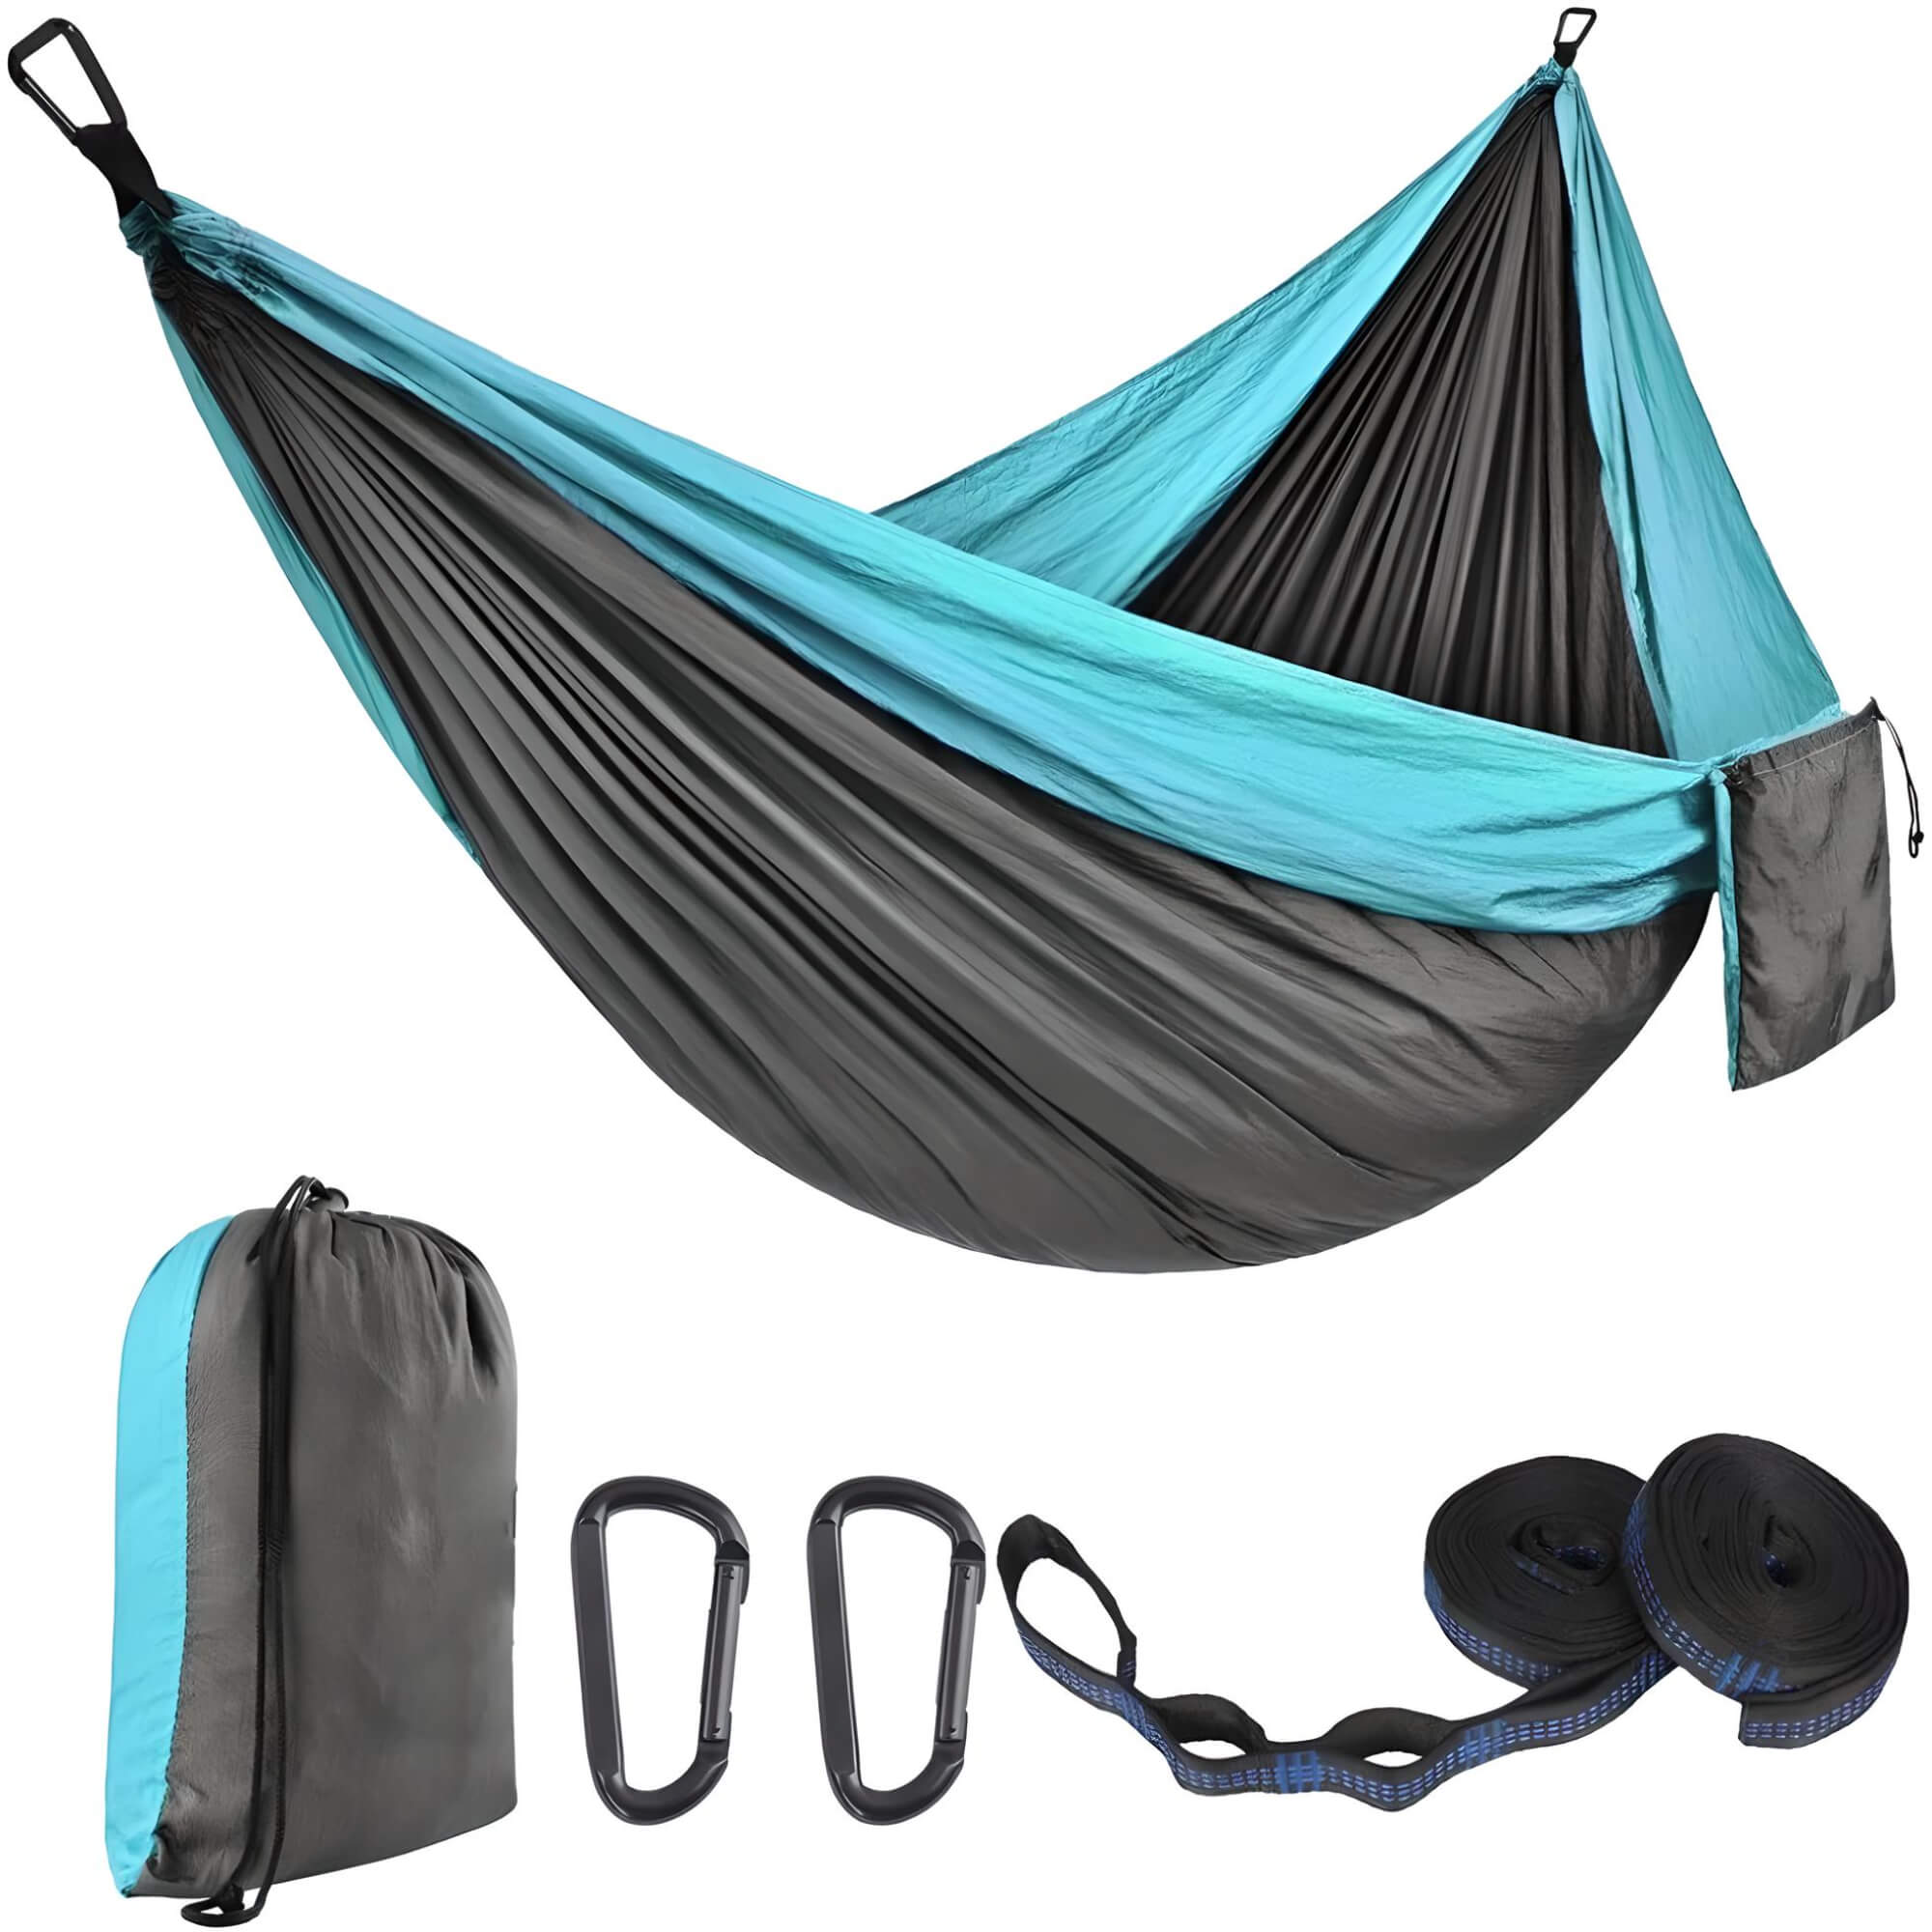 2person-hammock-with-mosquito-net-skyblue-colour